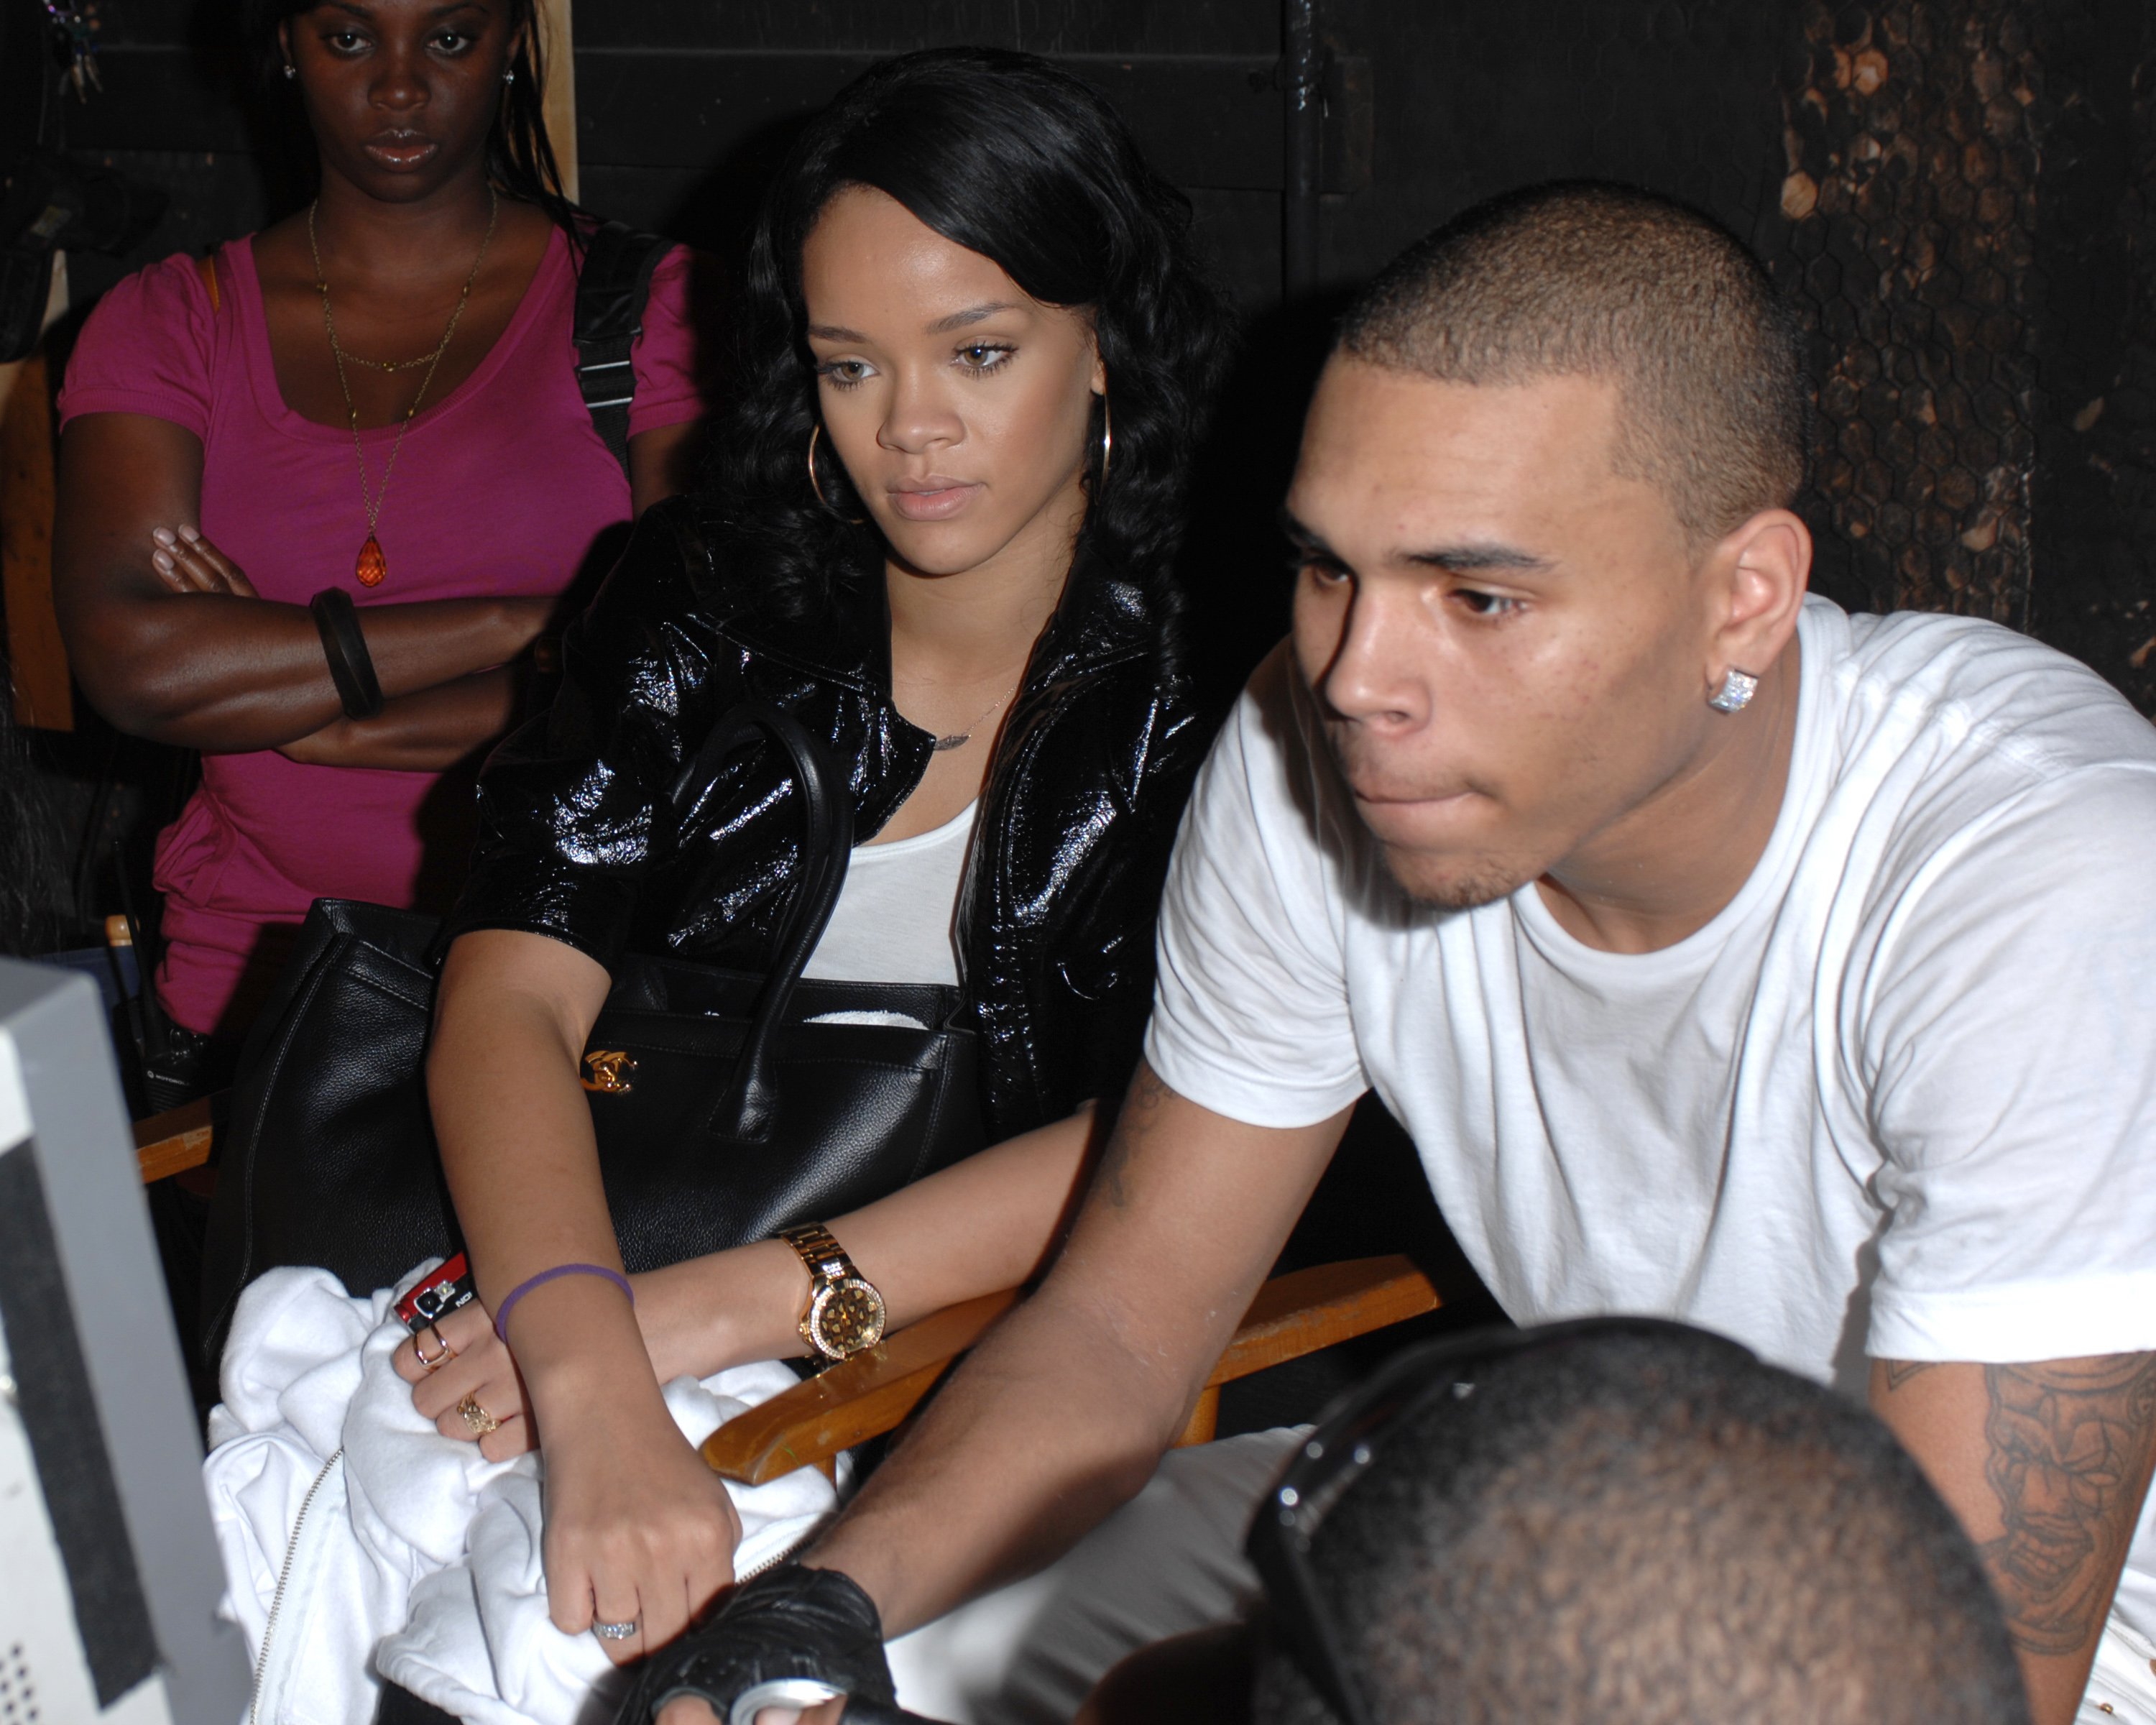 Rihanna and then-boyfriend Chris Brown on the set of a video shoot in December 2007 in Miami. | Photo: Getty Images